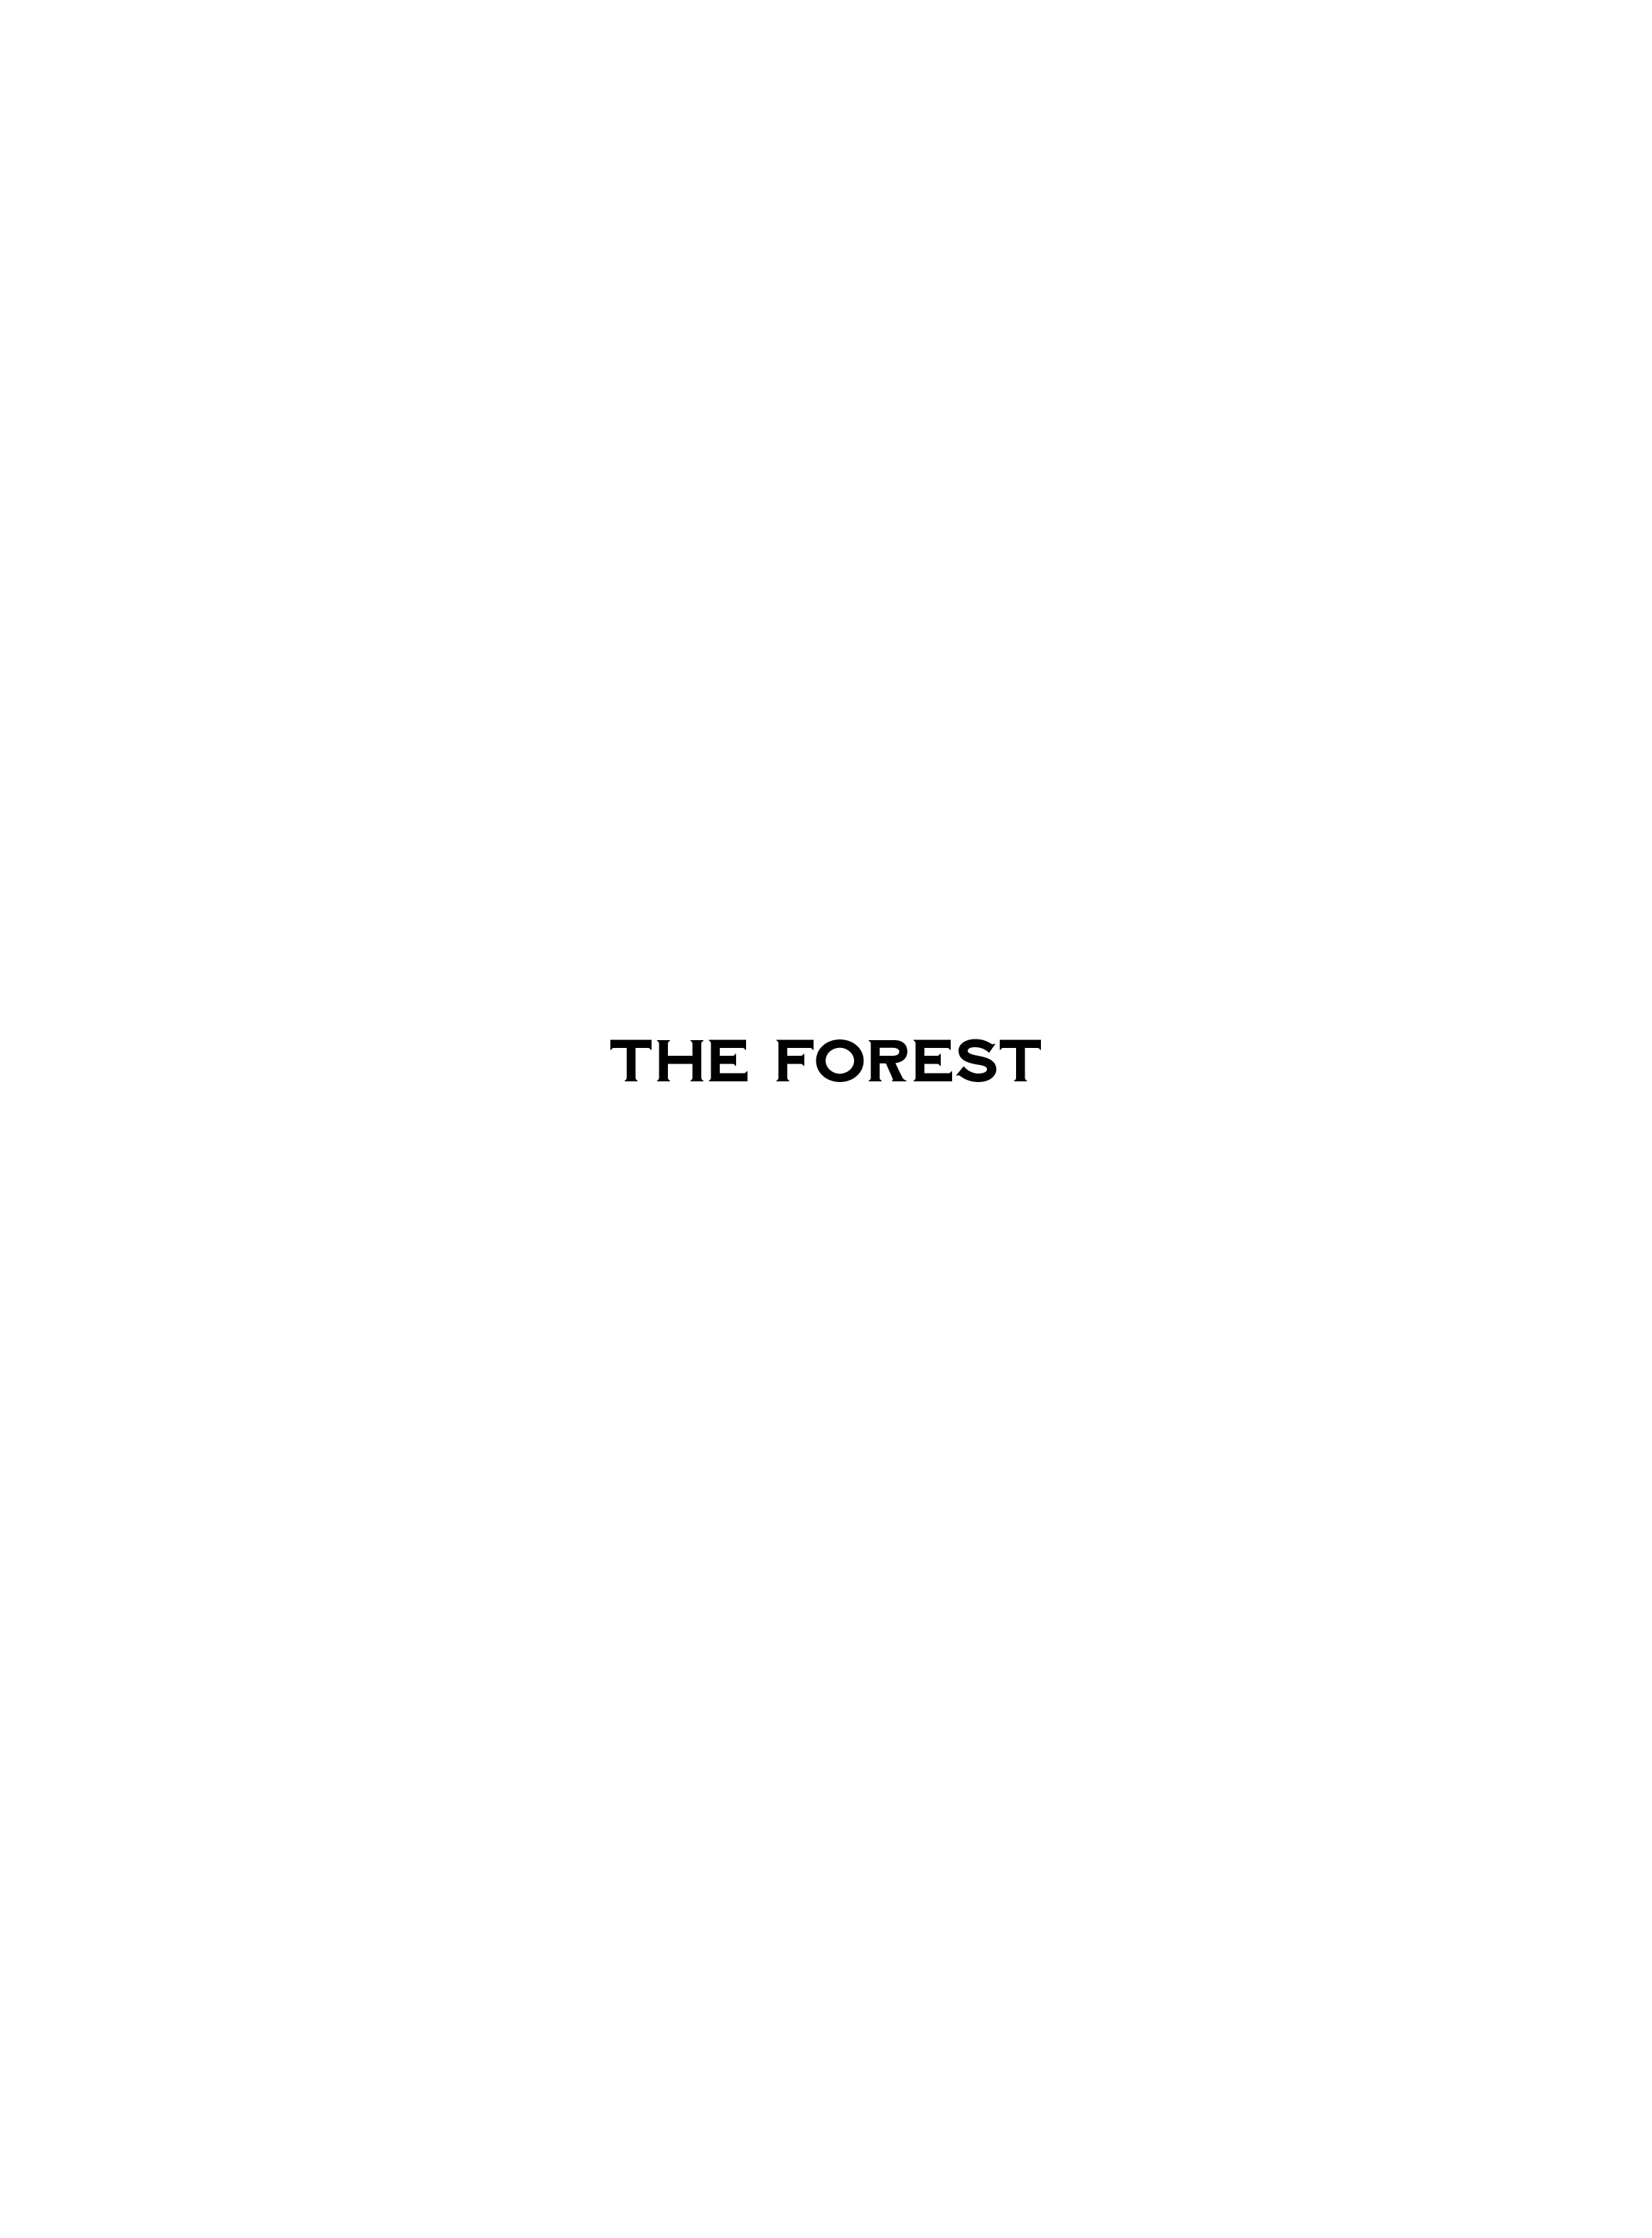 Read online The Forest comic -  Issue # Full - 2